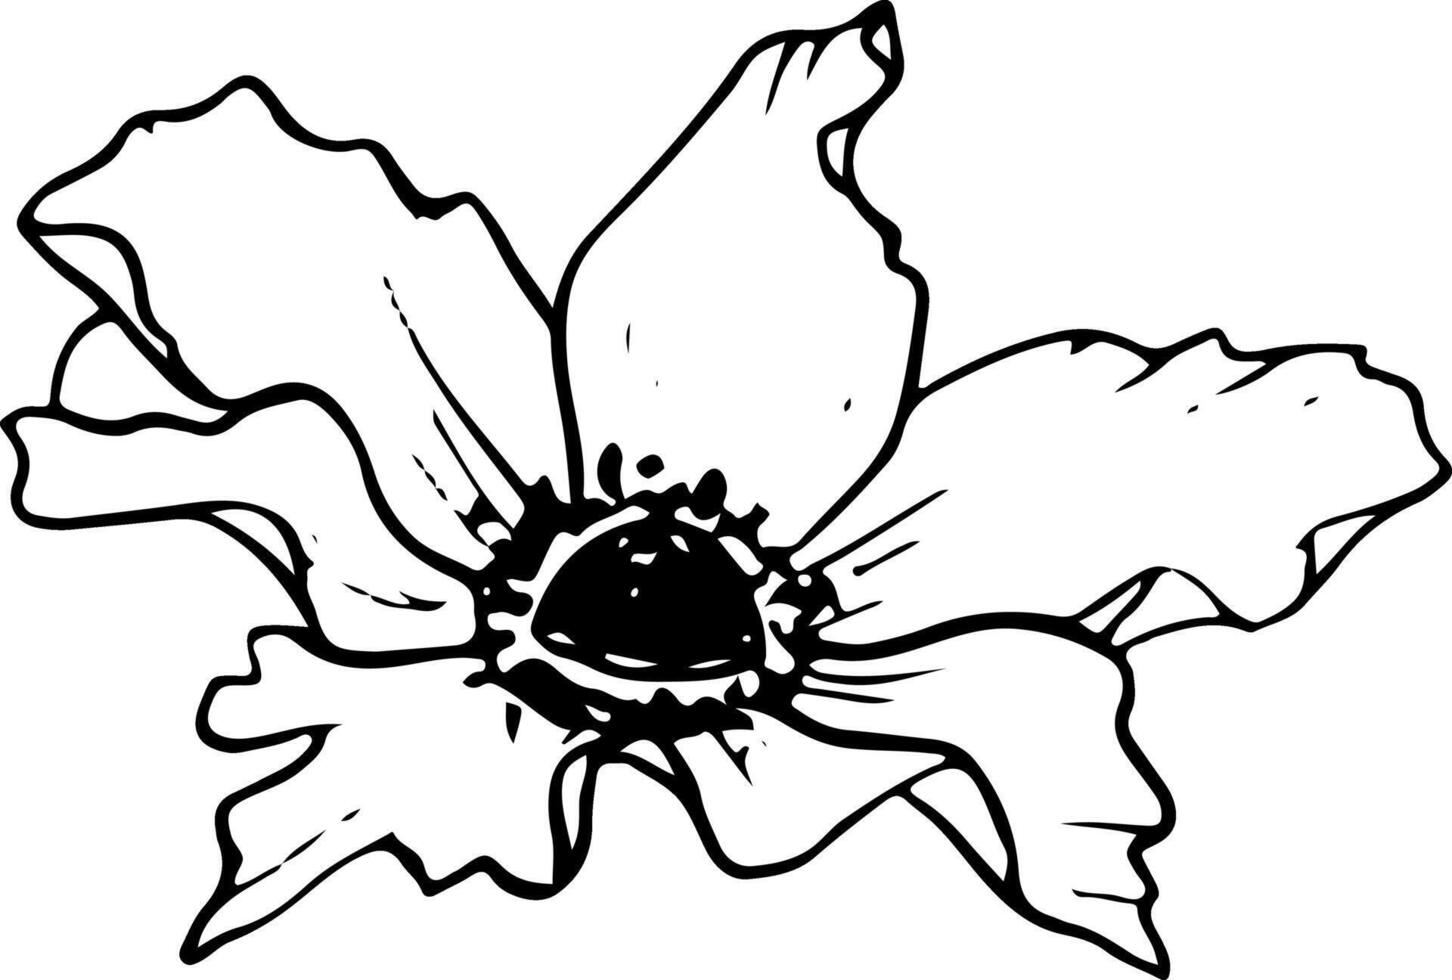 Spring flower vector line illustration. Field anemone poppy botanical line drawing for greeting cards, stationary and wedding designs